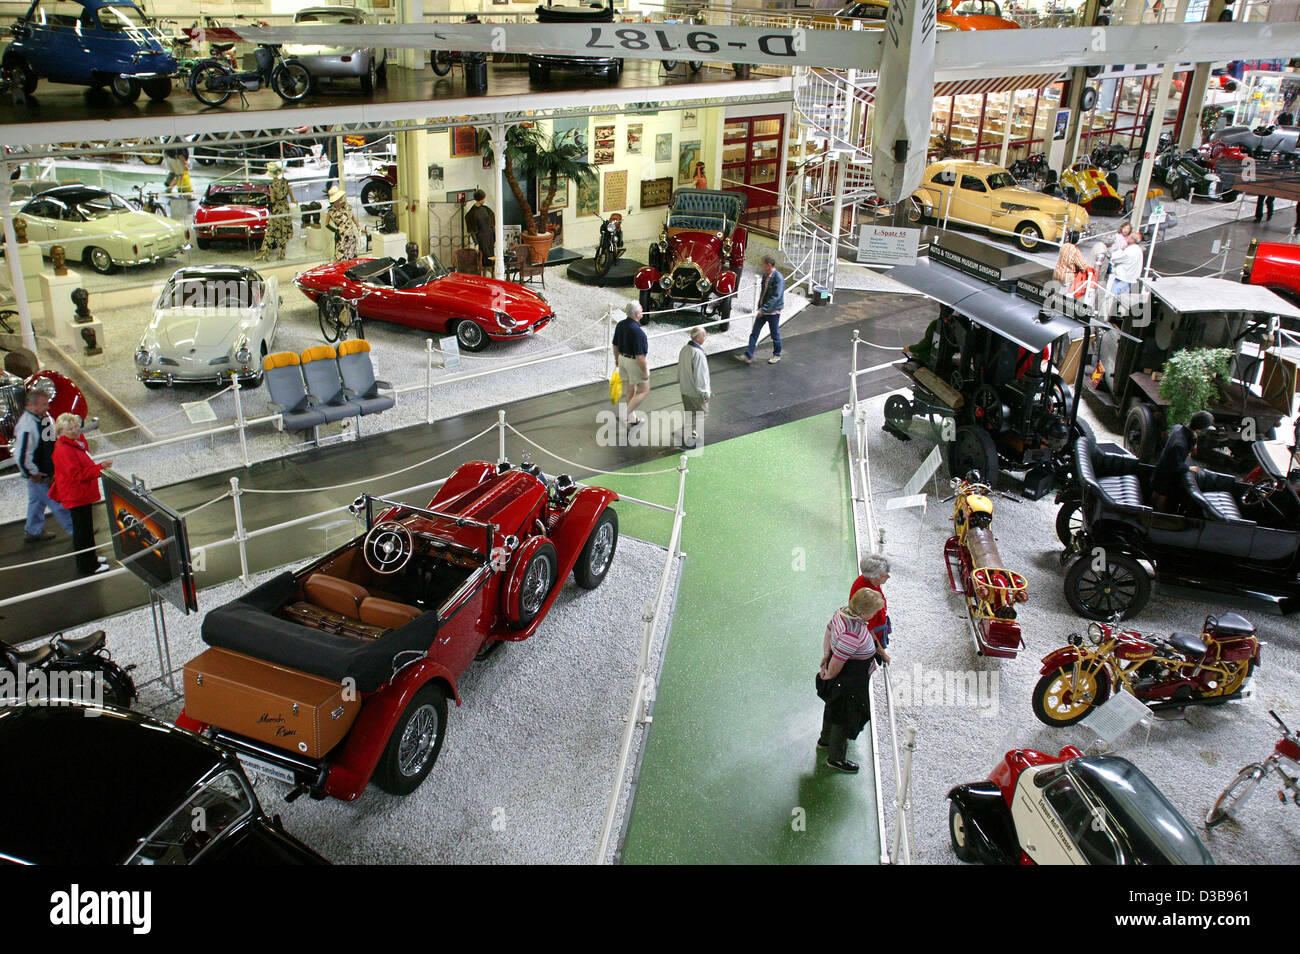 (dpa) - The picture shows the interior of the Automobile and Technology Museum in Sinsheim, Germany, Wednesday, 6 July 2005. More than 3,000 objects are on display in the exhibition hall covering 30,000 sqm. The outdoor area features the supersonic plane Concorde and a Russian Tupolev 144. The museu Stock Photo